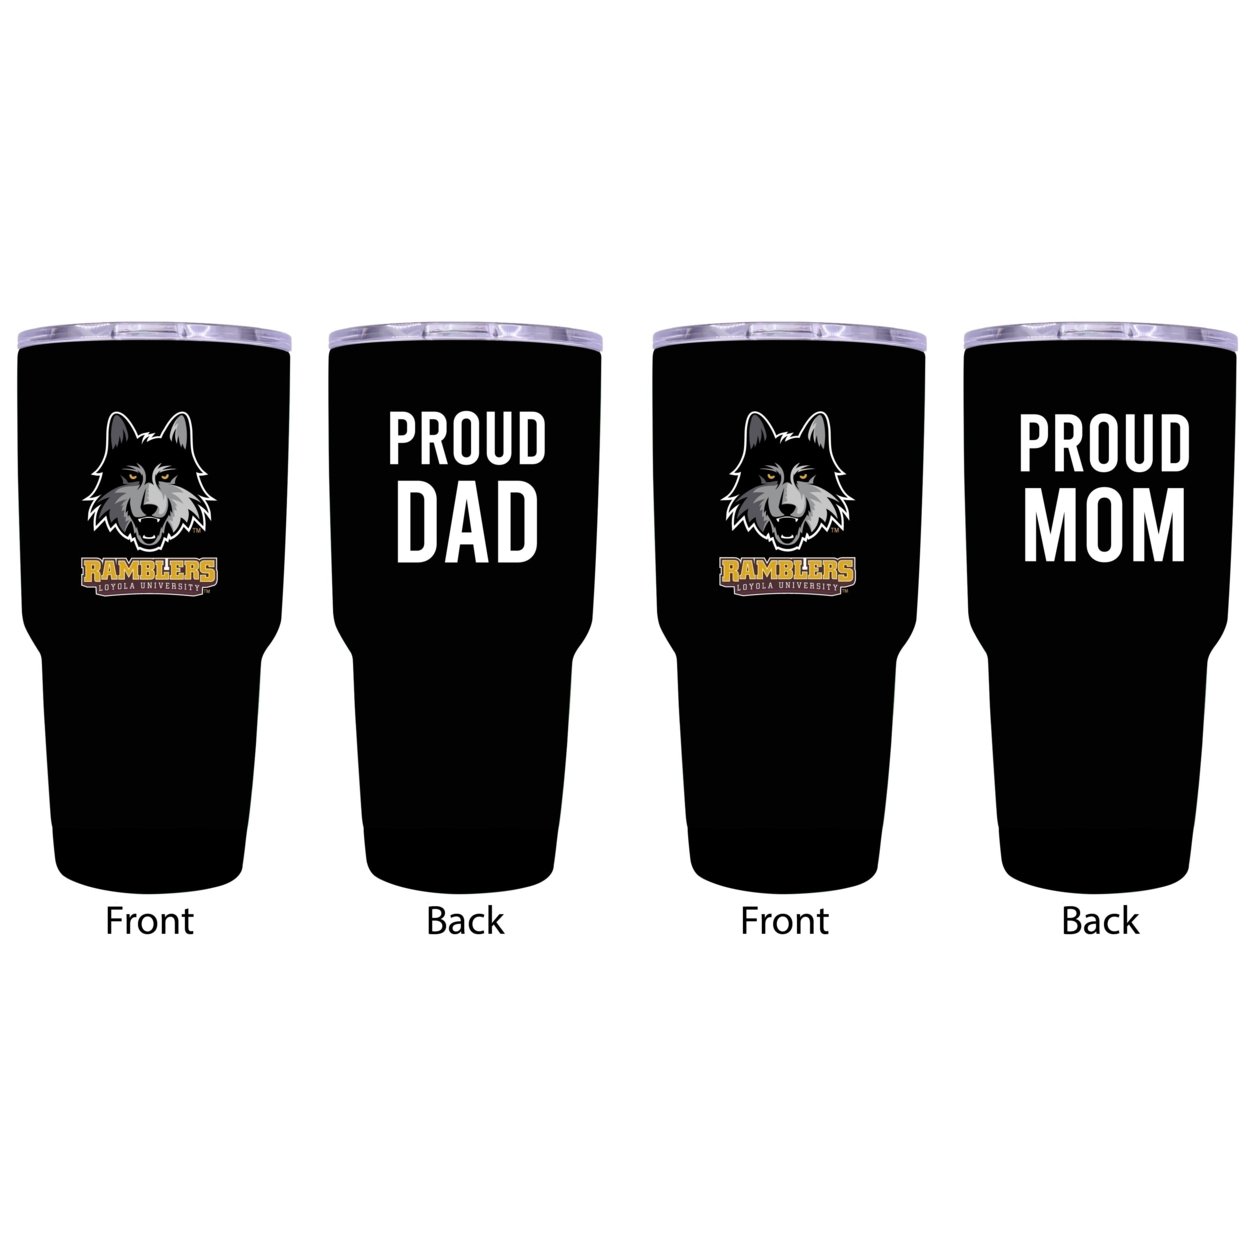 Loyola University Ramblers Proud Mom And Dad 24 Oz Insulated Stainless Steel Tumblers 2 Pack Black.